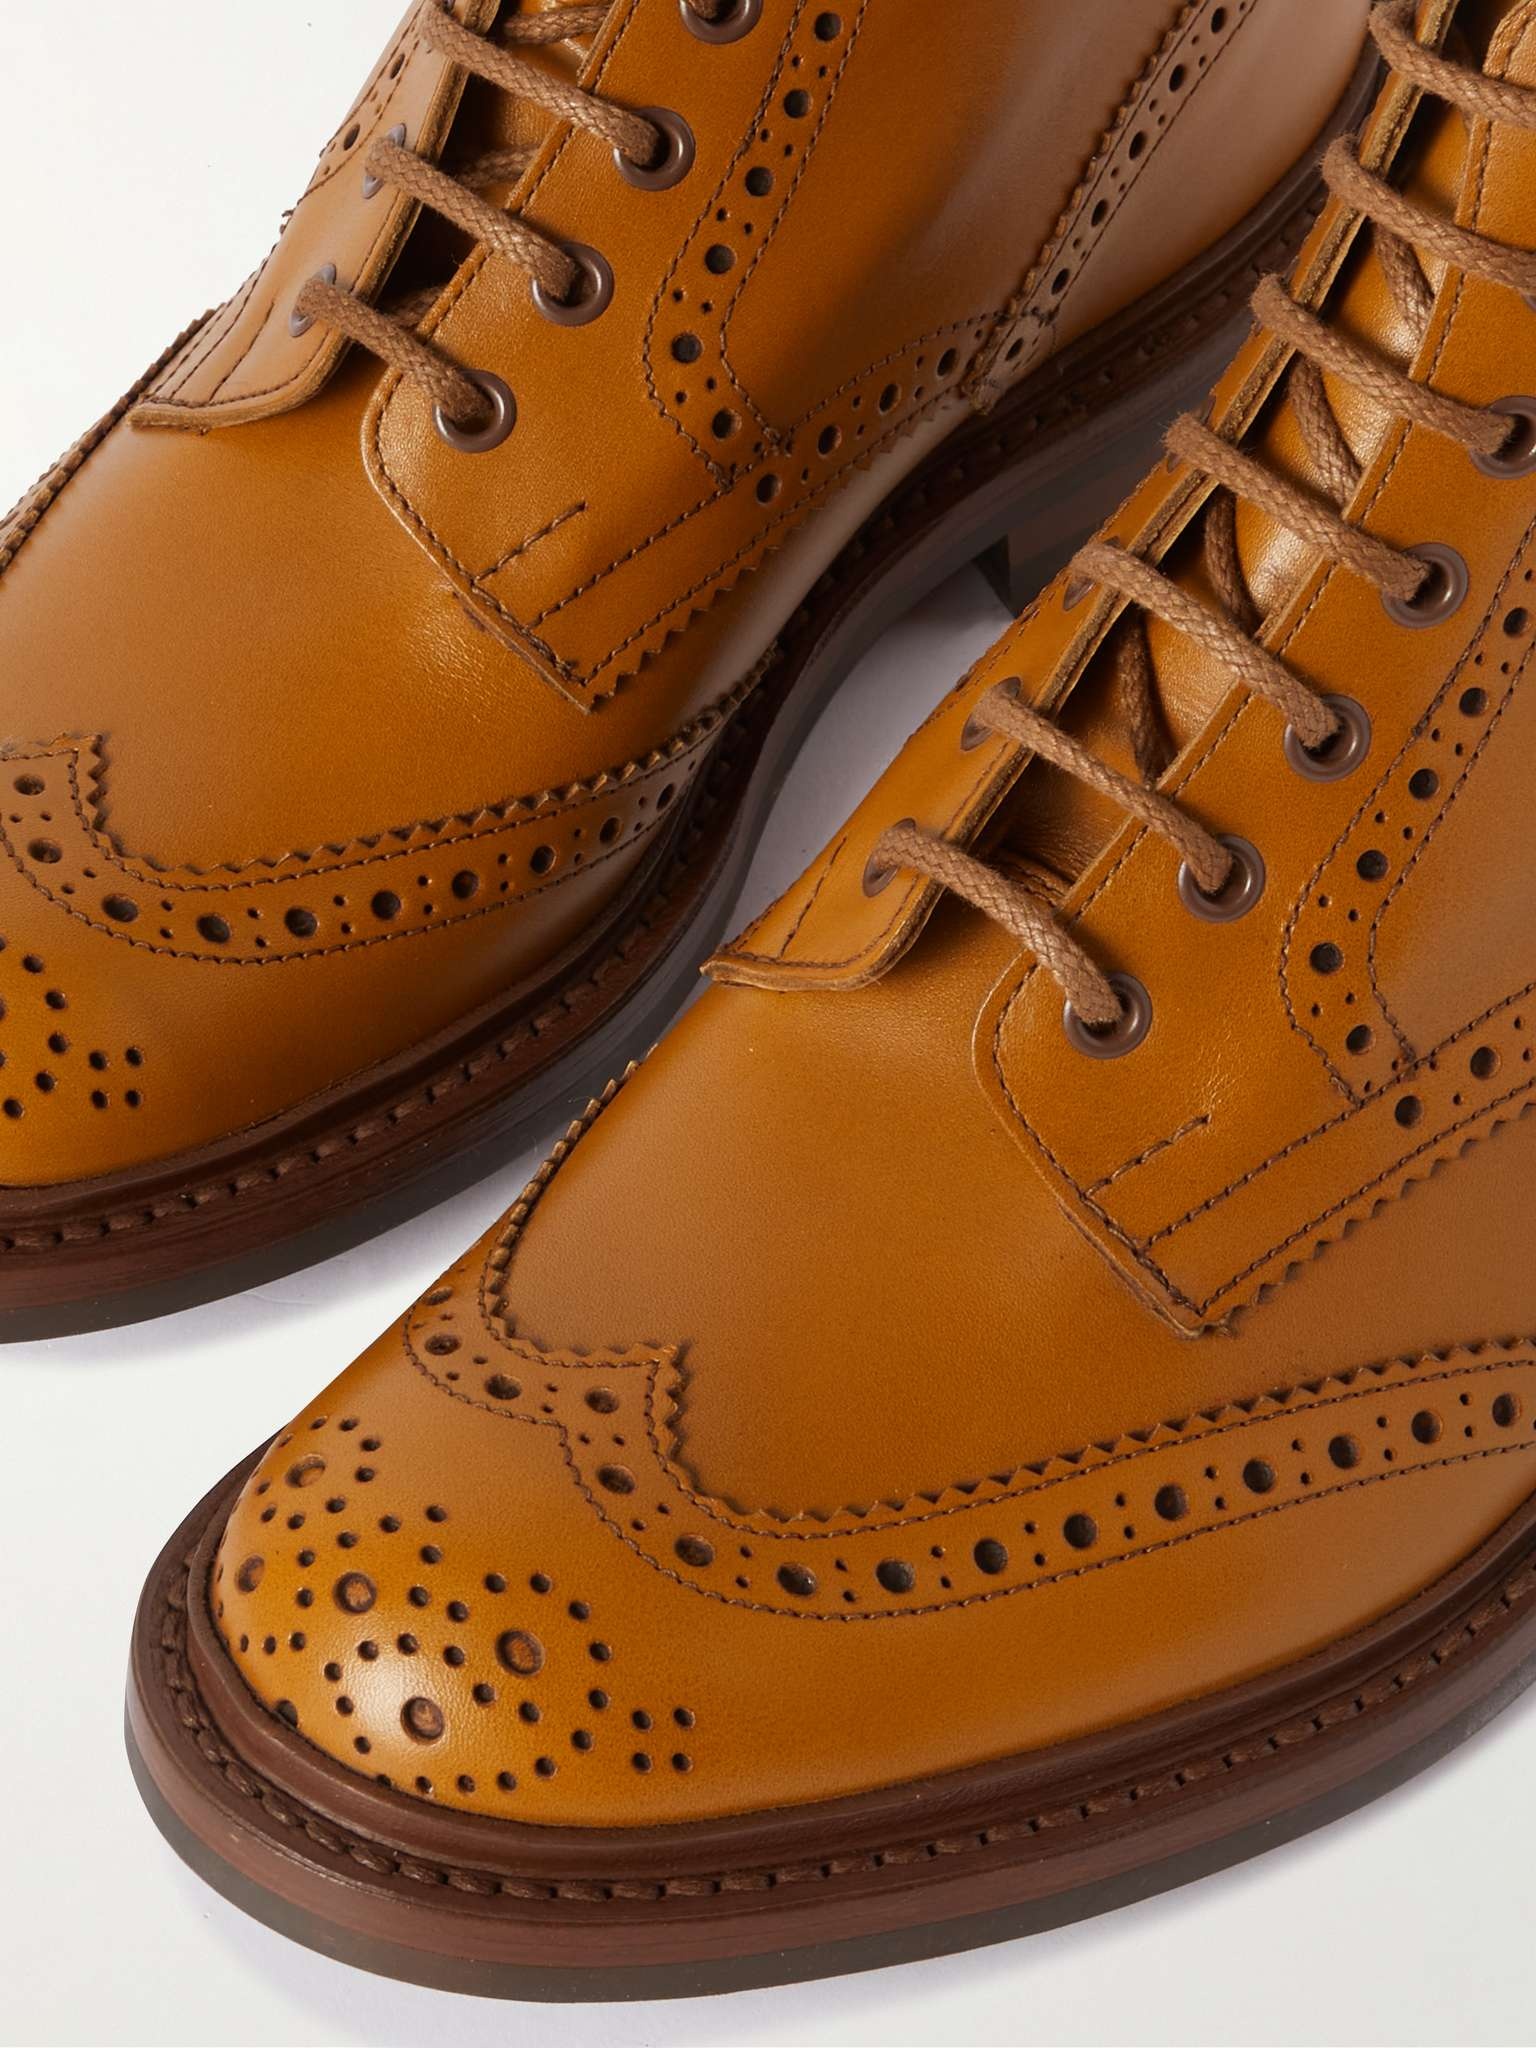 Stow Leather Brogue Boots - 6